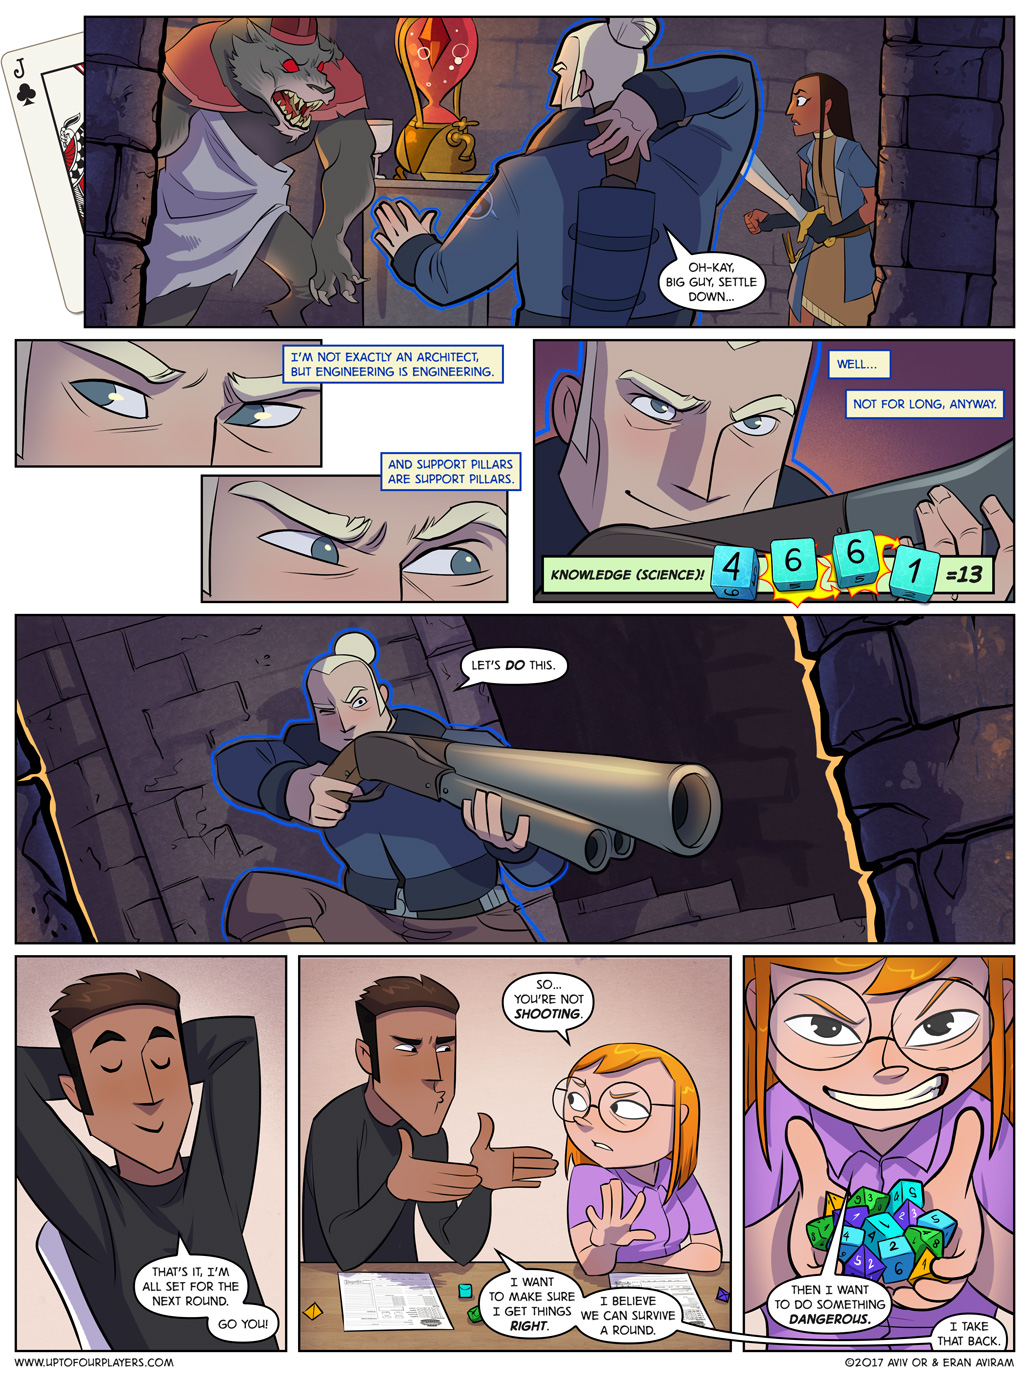 Wild at Heart – Page 18